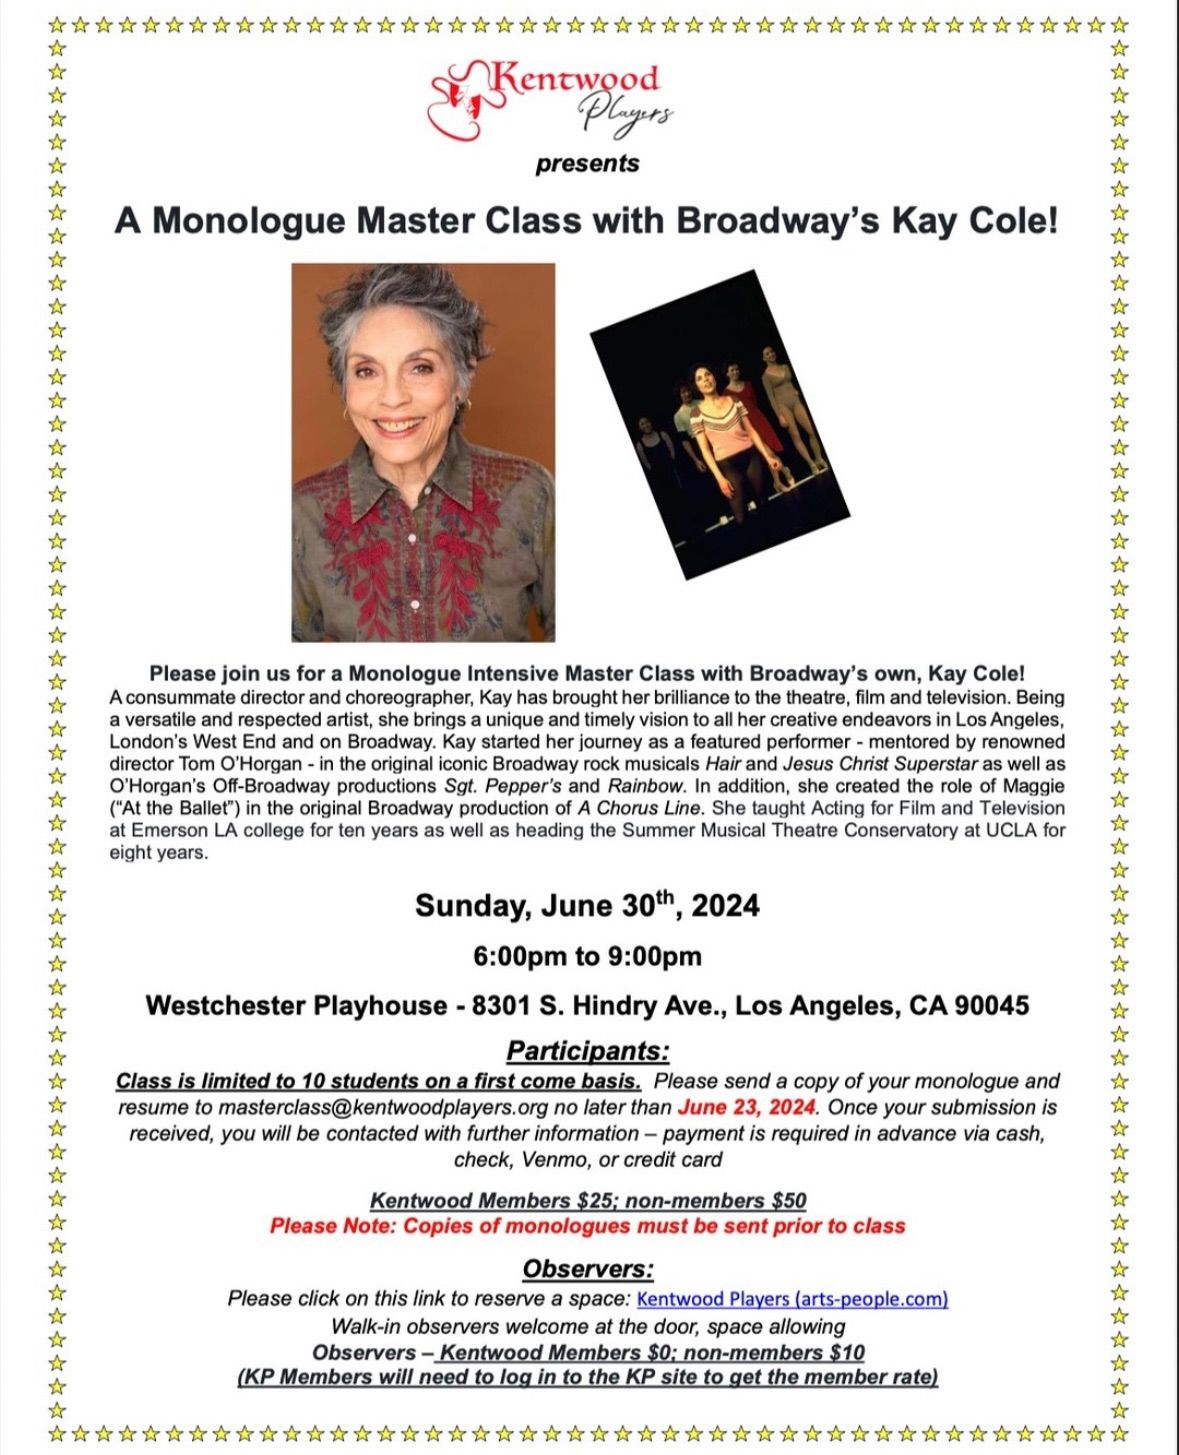 Kentwood's Monologue Master Class with Kay Cole